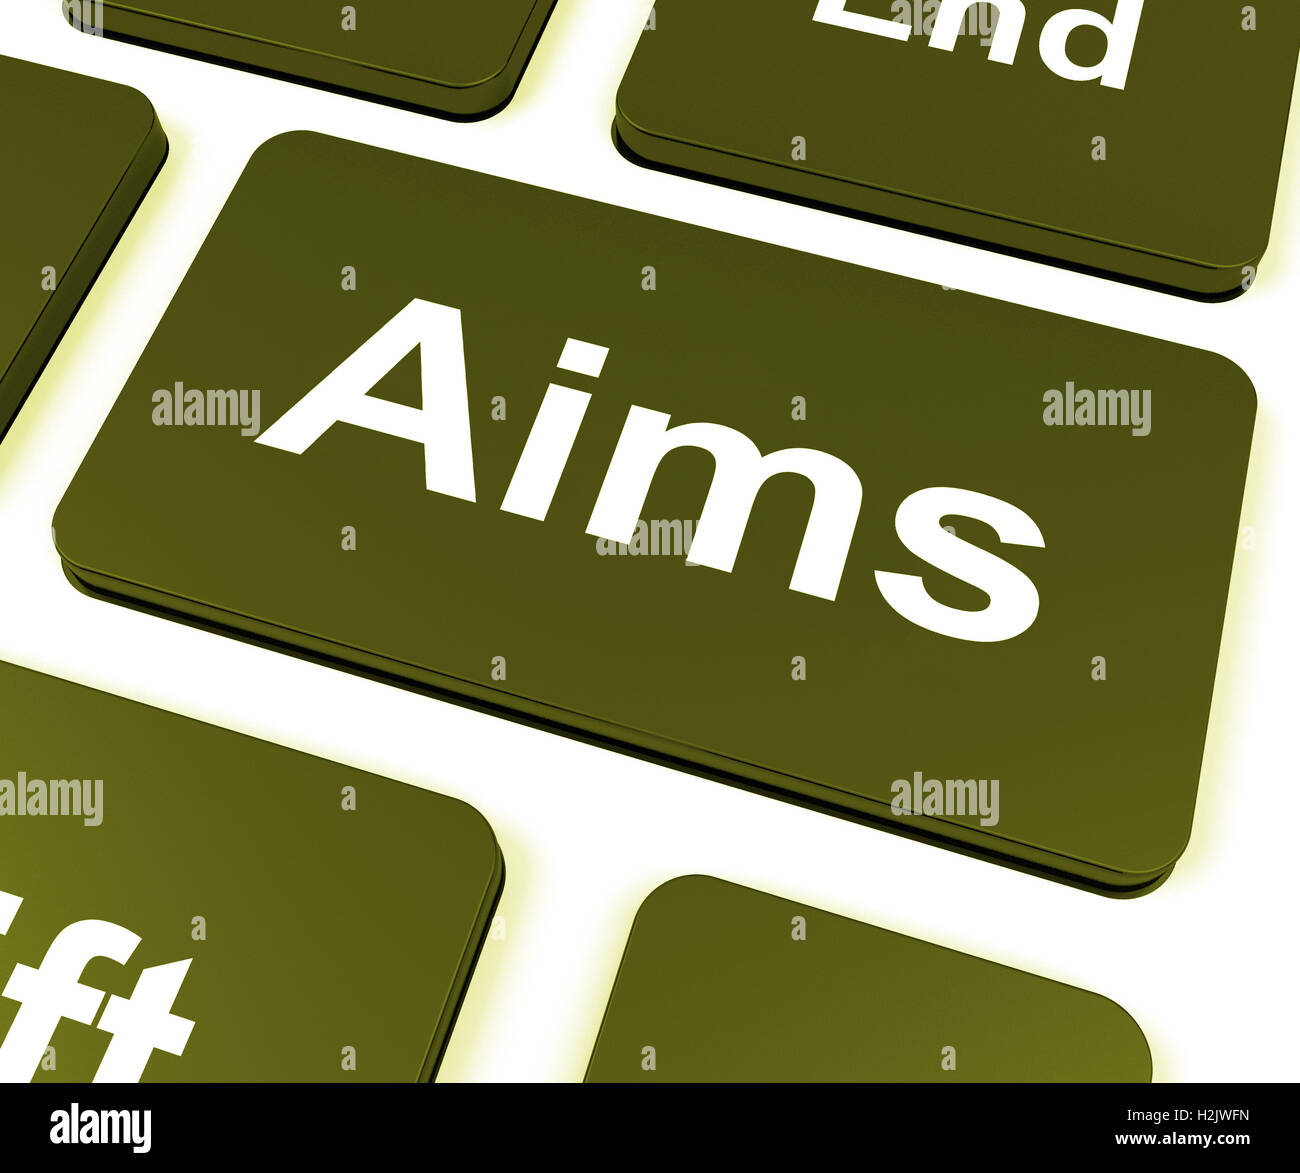 Aims Key Shows Targeting Purpose And Aspiration Stock Photo